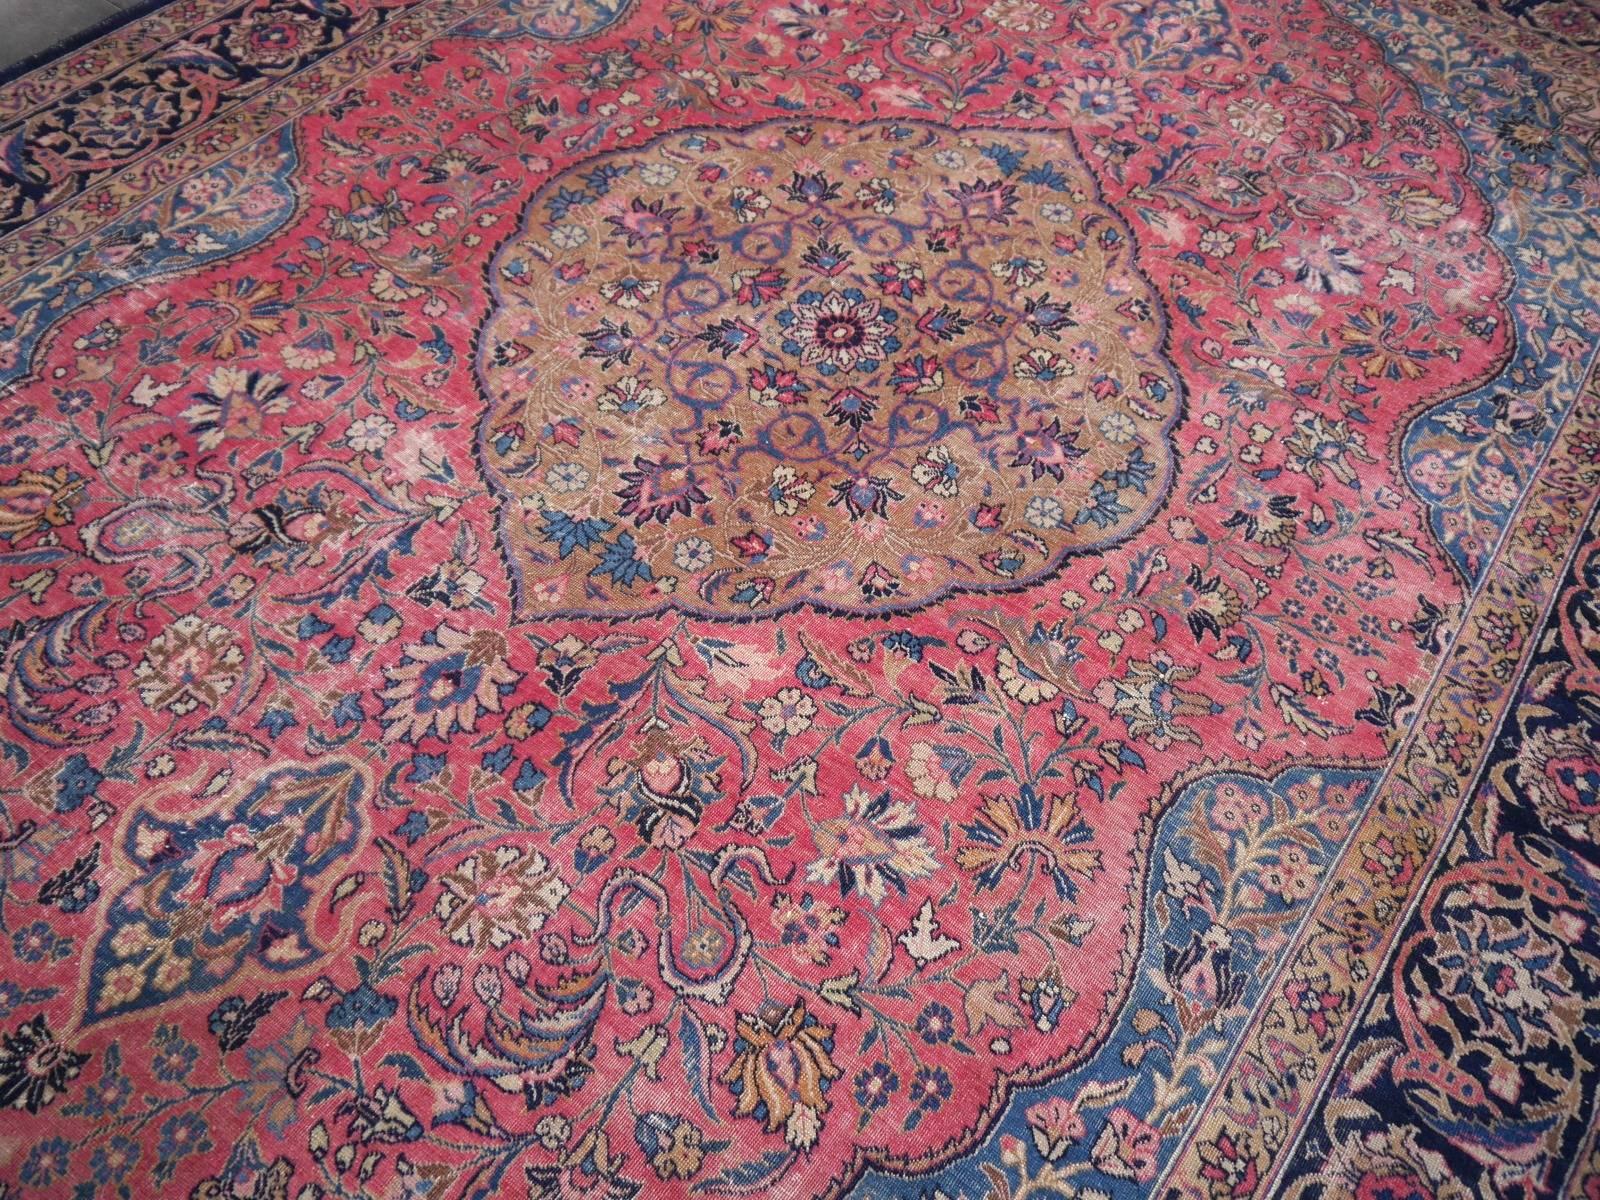 A beautiful antique rug. This unusual colored Carpet has a classic oval center design with is referred to as a style first made by the Haji Jalili workshop. This design affected the classic oriental rugs for decades. The condition of the rug is good